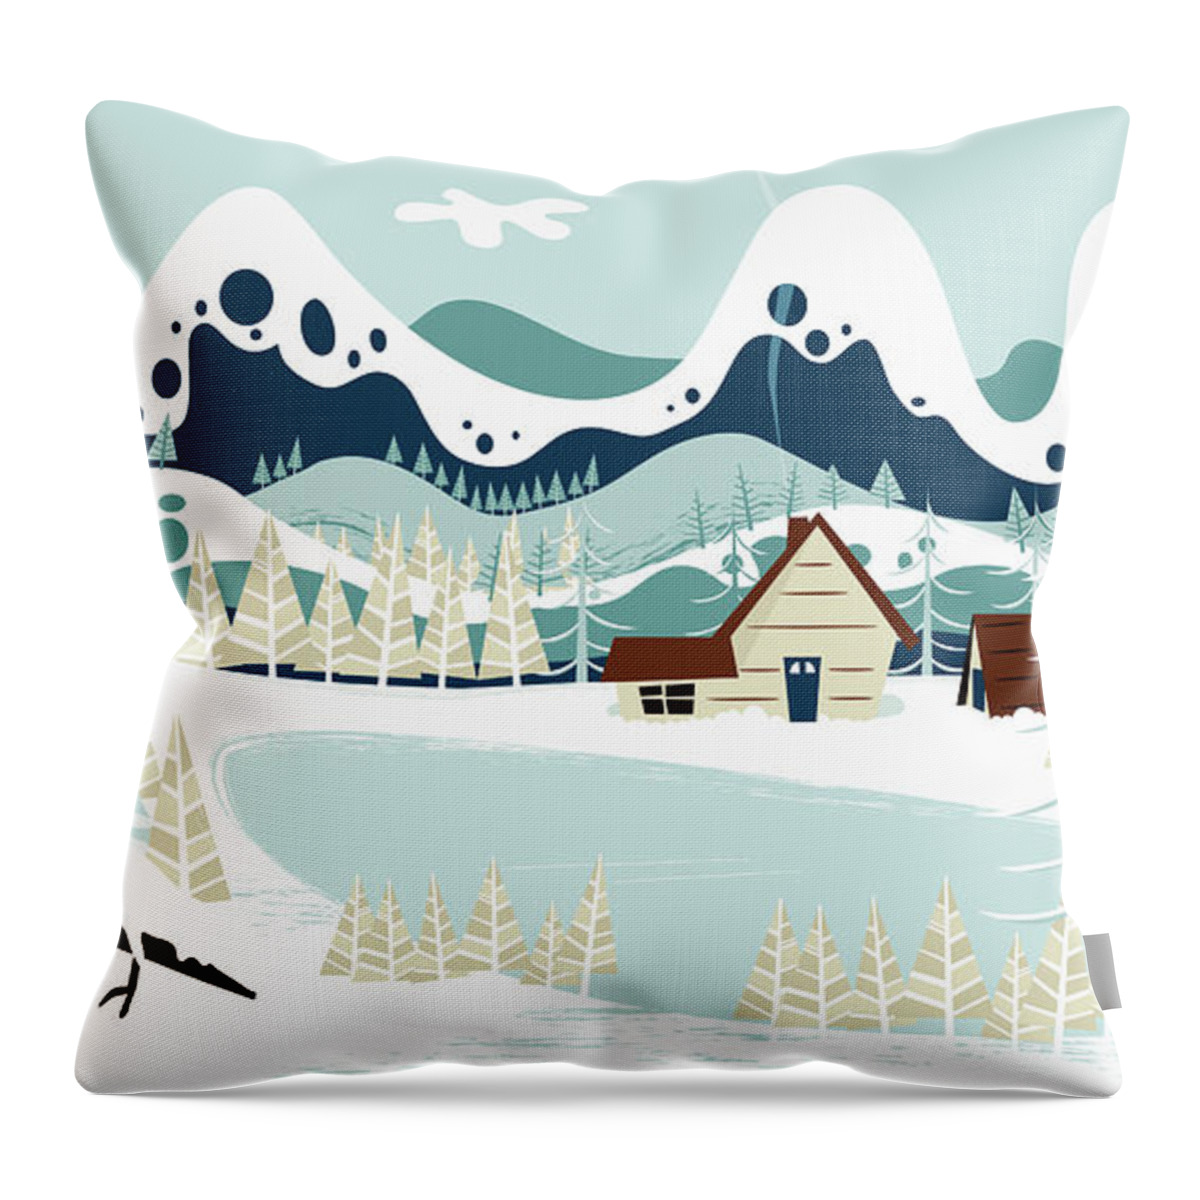 Alpine Throw Pillow featuring the photograph Lakeside Cabin Below Mountains In Snow by Ikon Ikon Images